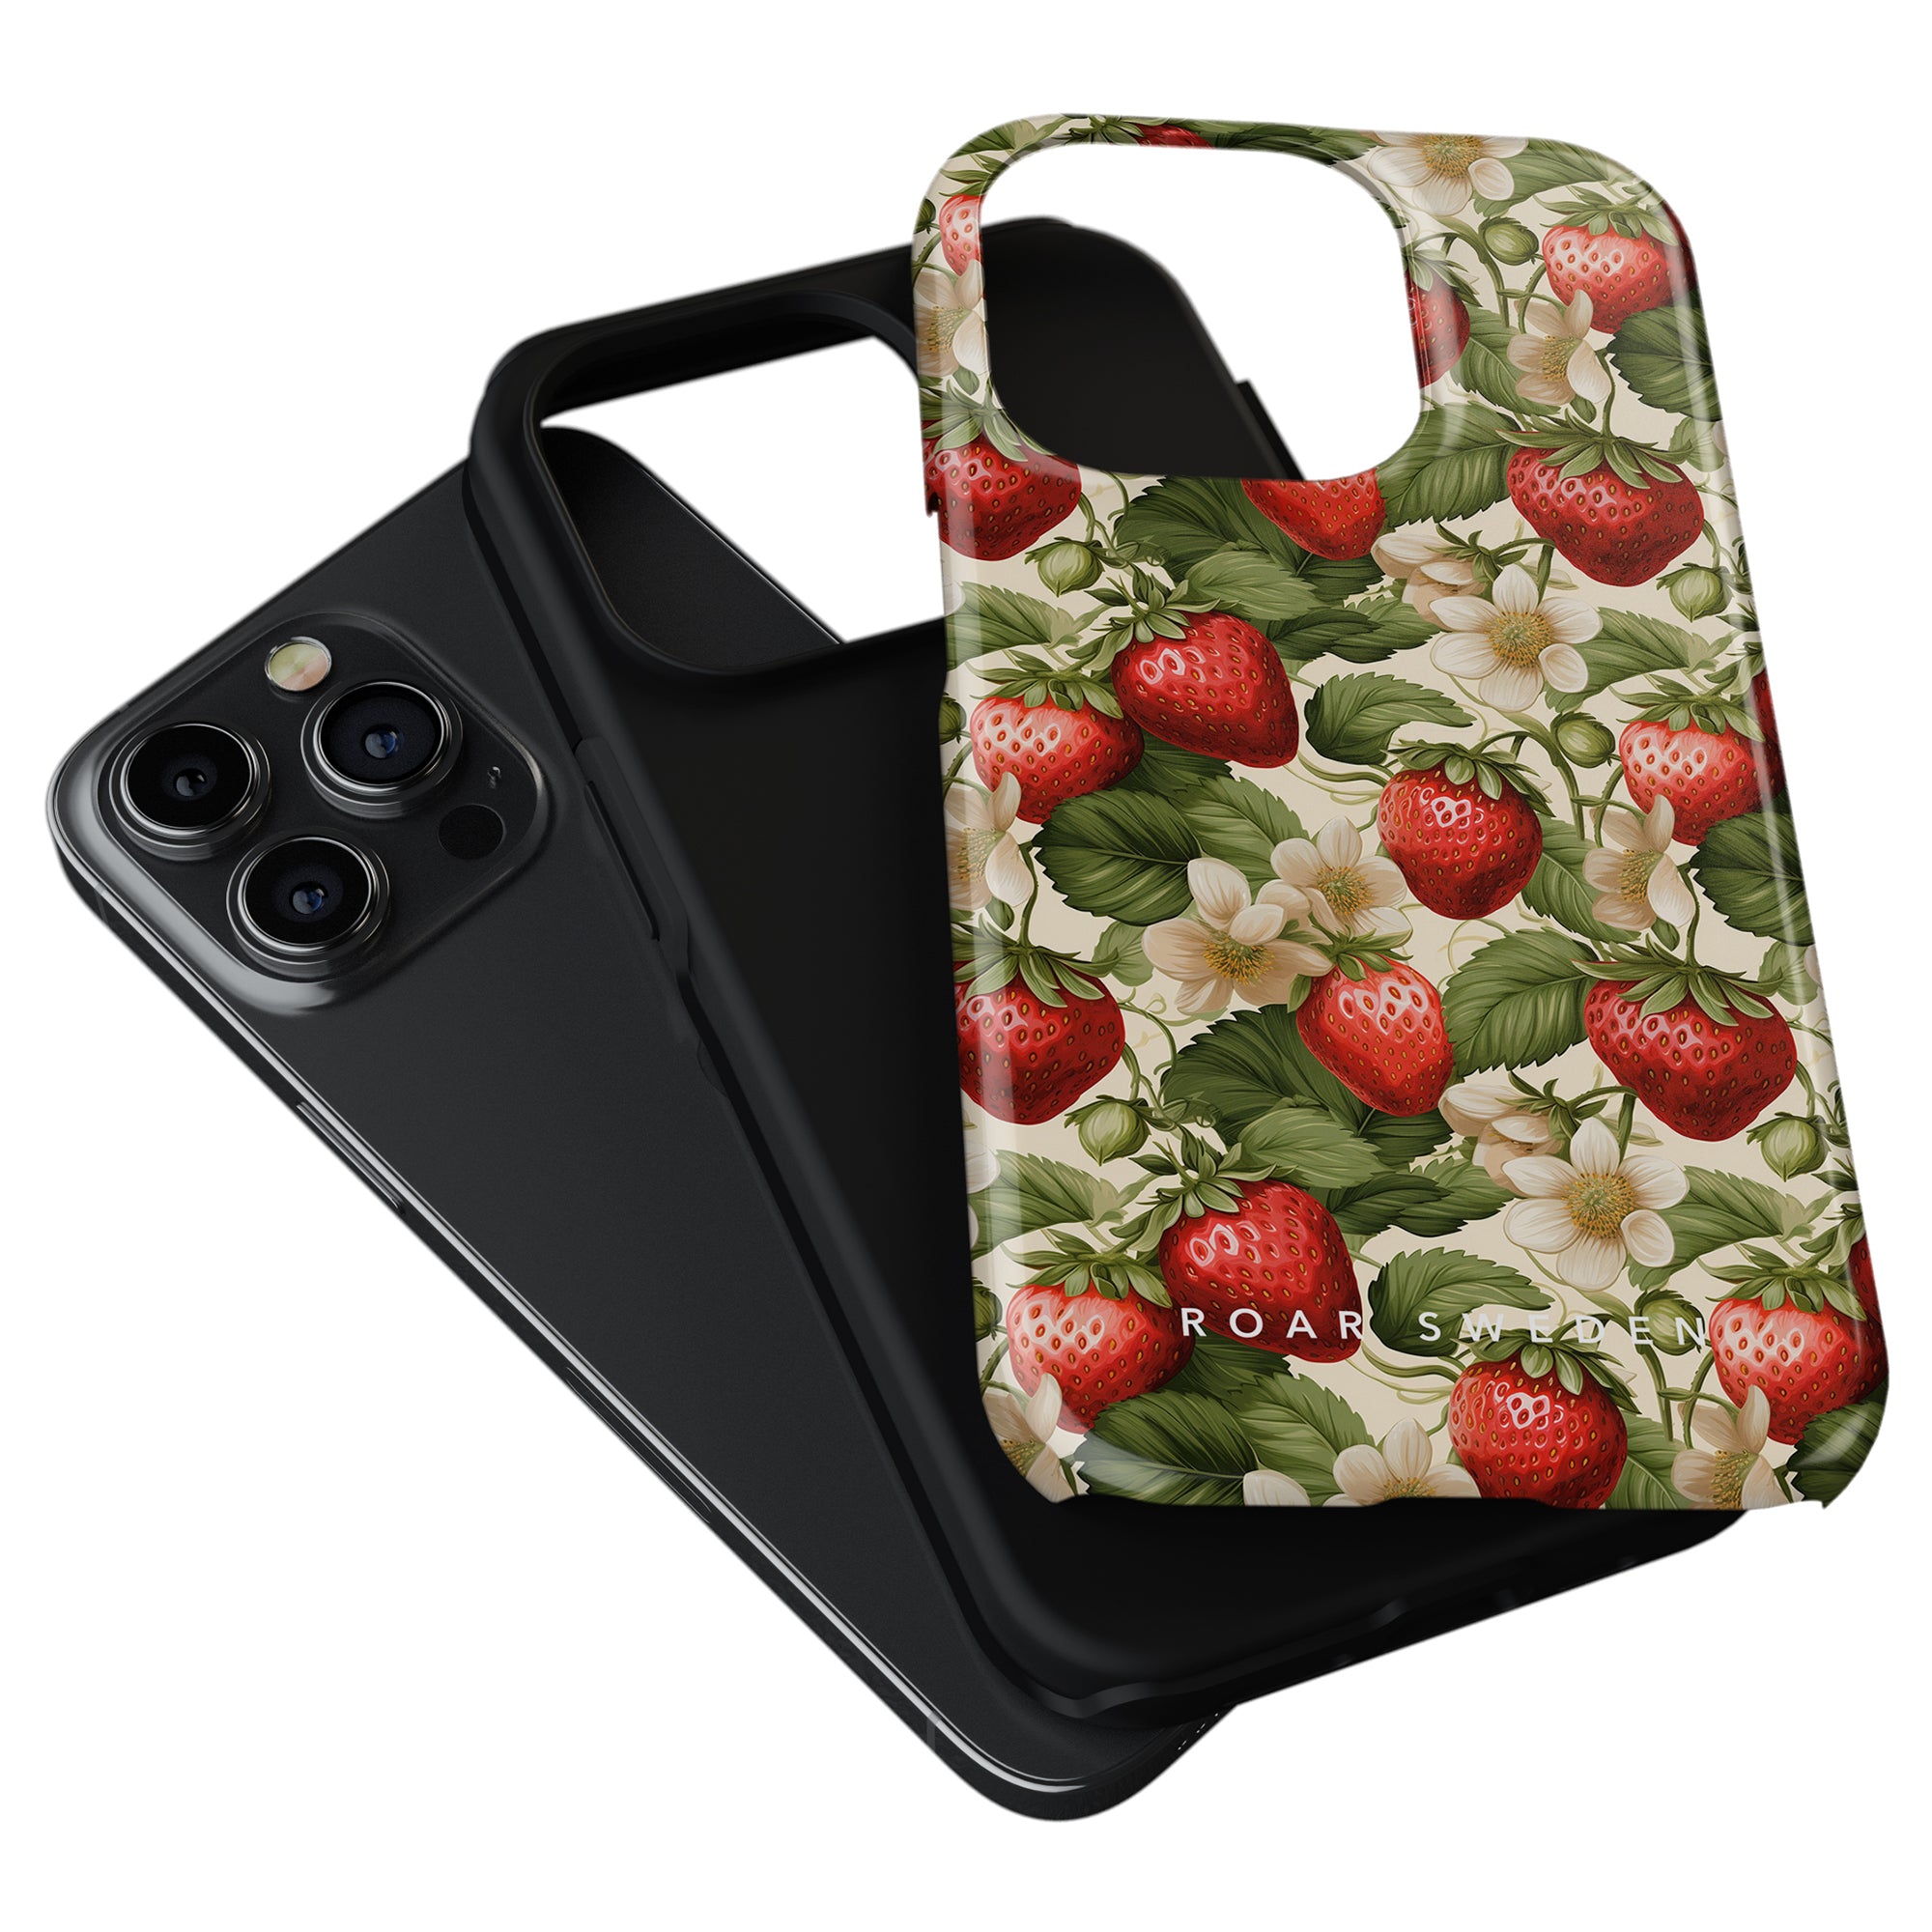 A black smartphone with a triple camera setup alongside an exotic collection floral-patterned Strawberries - Tough Case.